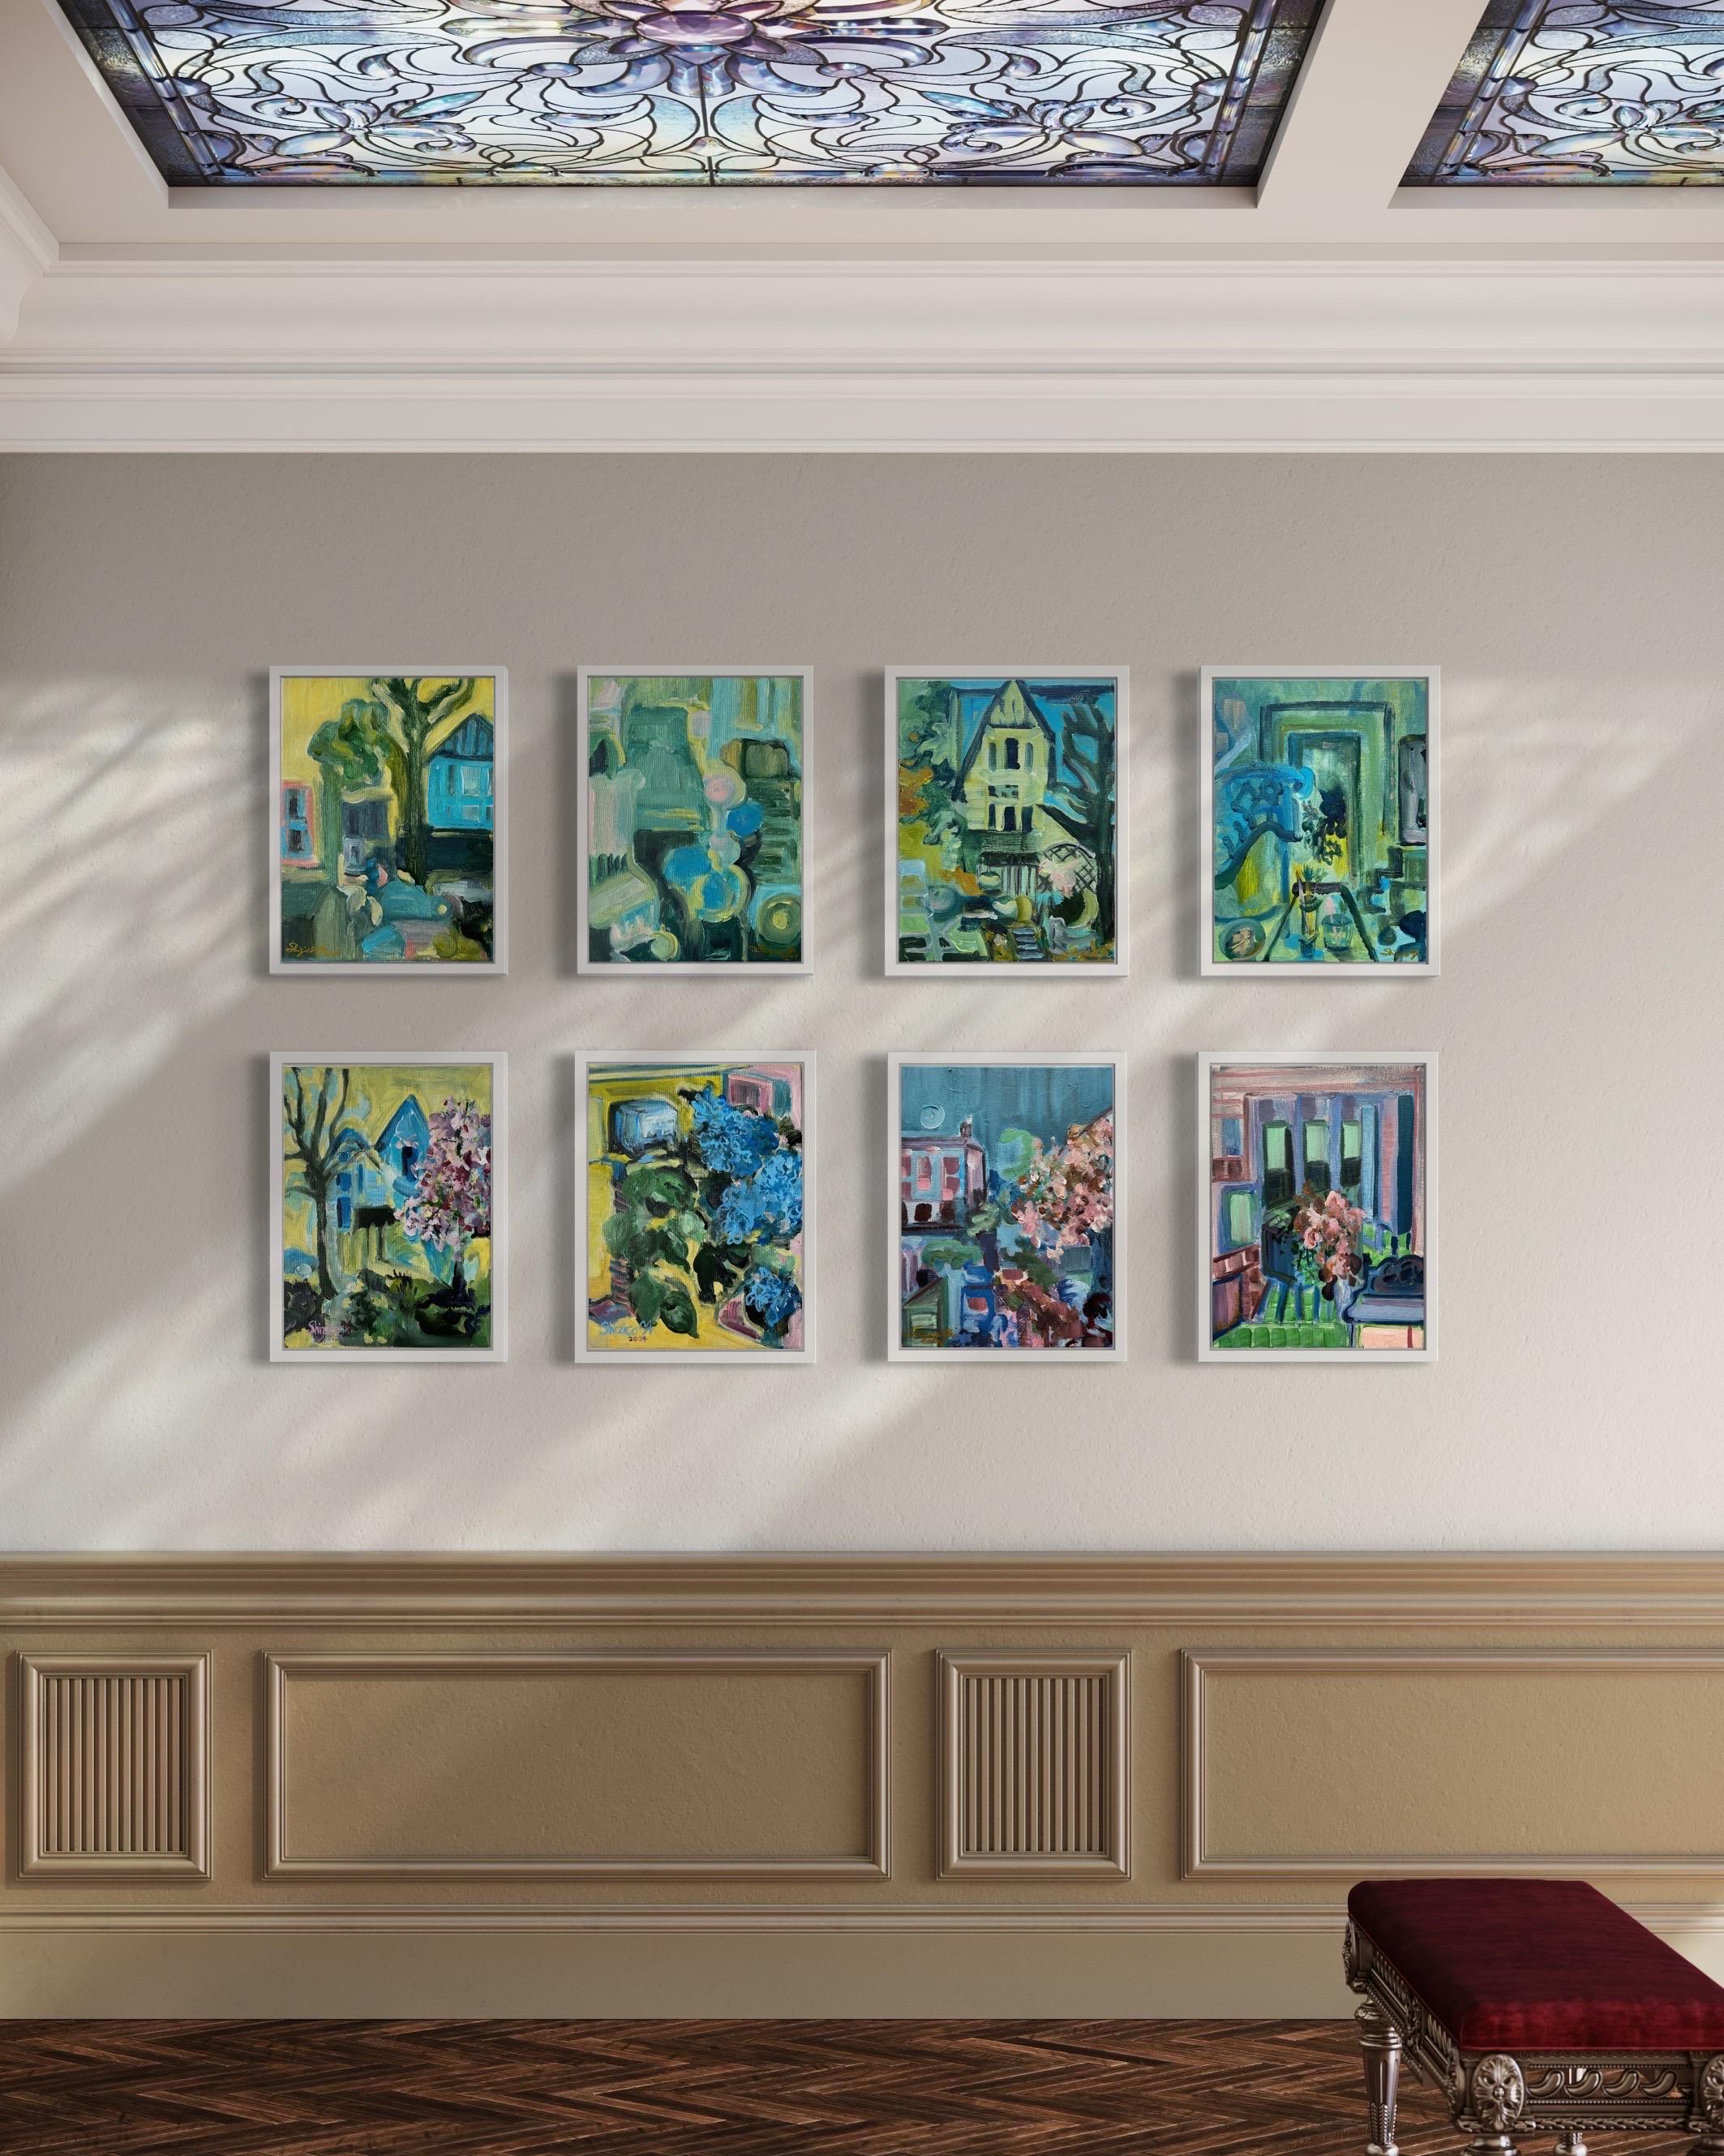 [Spring Duet] is a project that explores the format of a diptych through a series of set paintings. Shizu painted all paintings en plein air in situ, capturing the landscape outside of her studio and the interiors of the studio in its entirety,